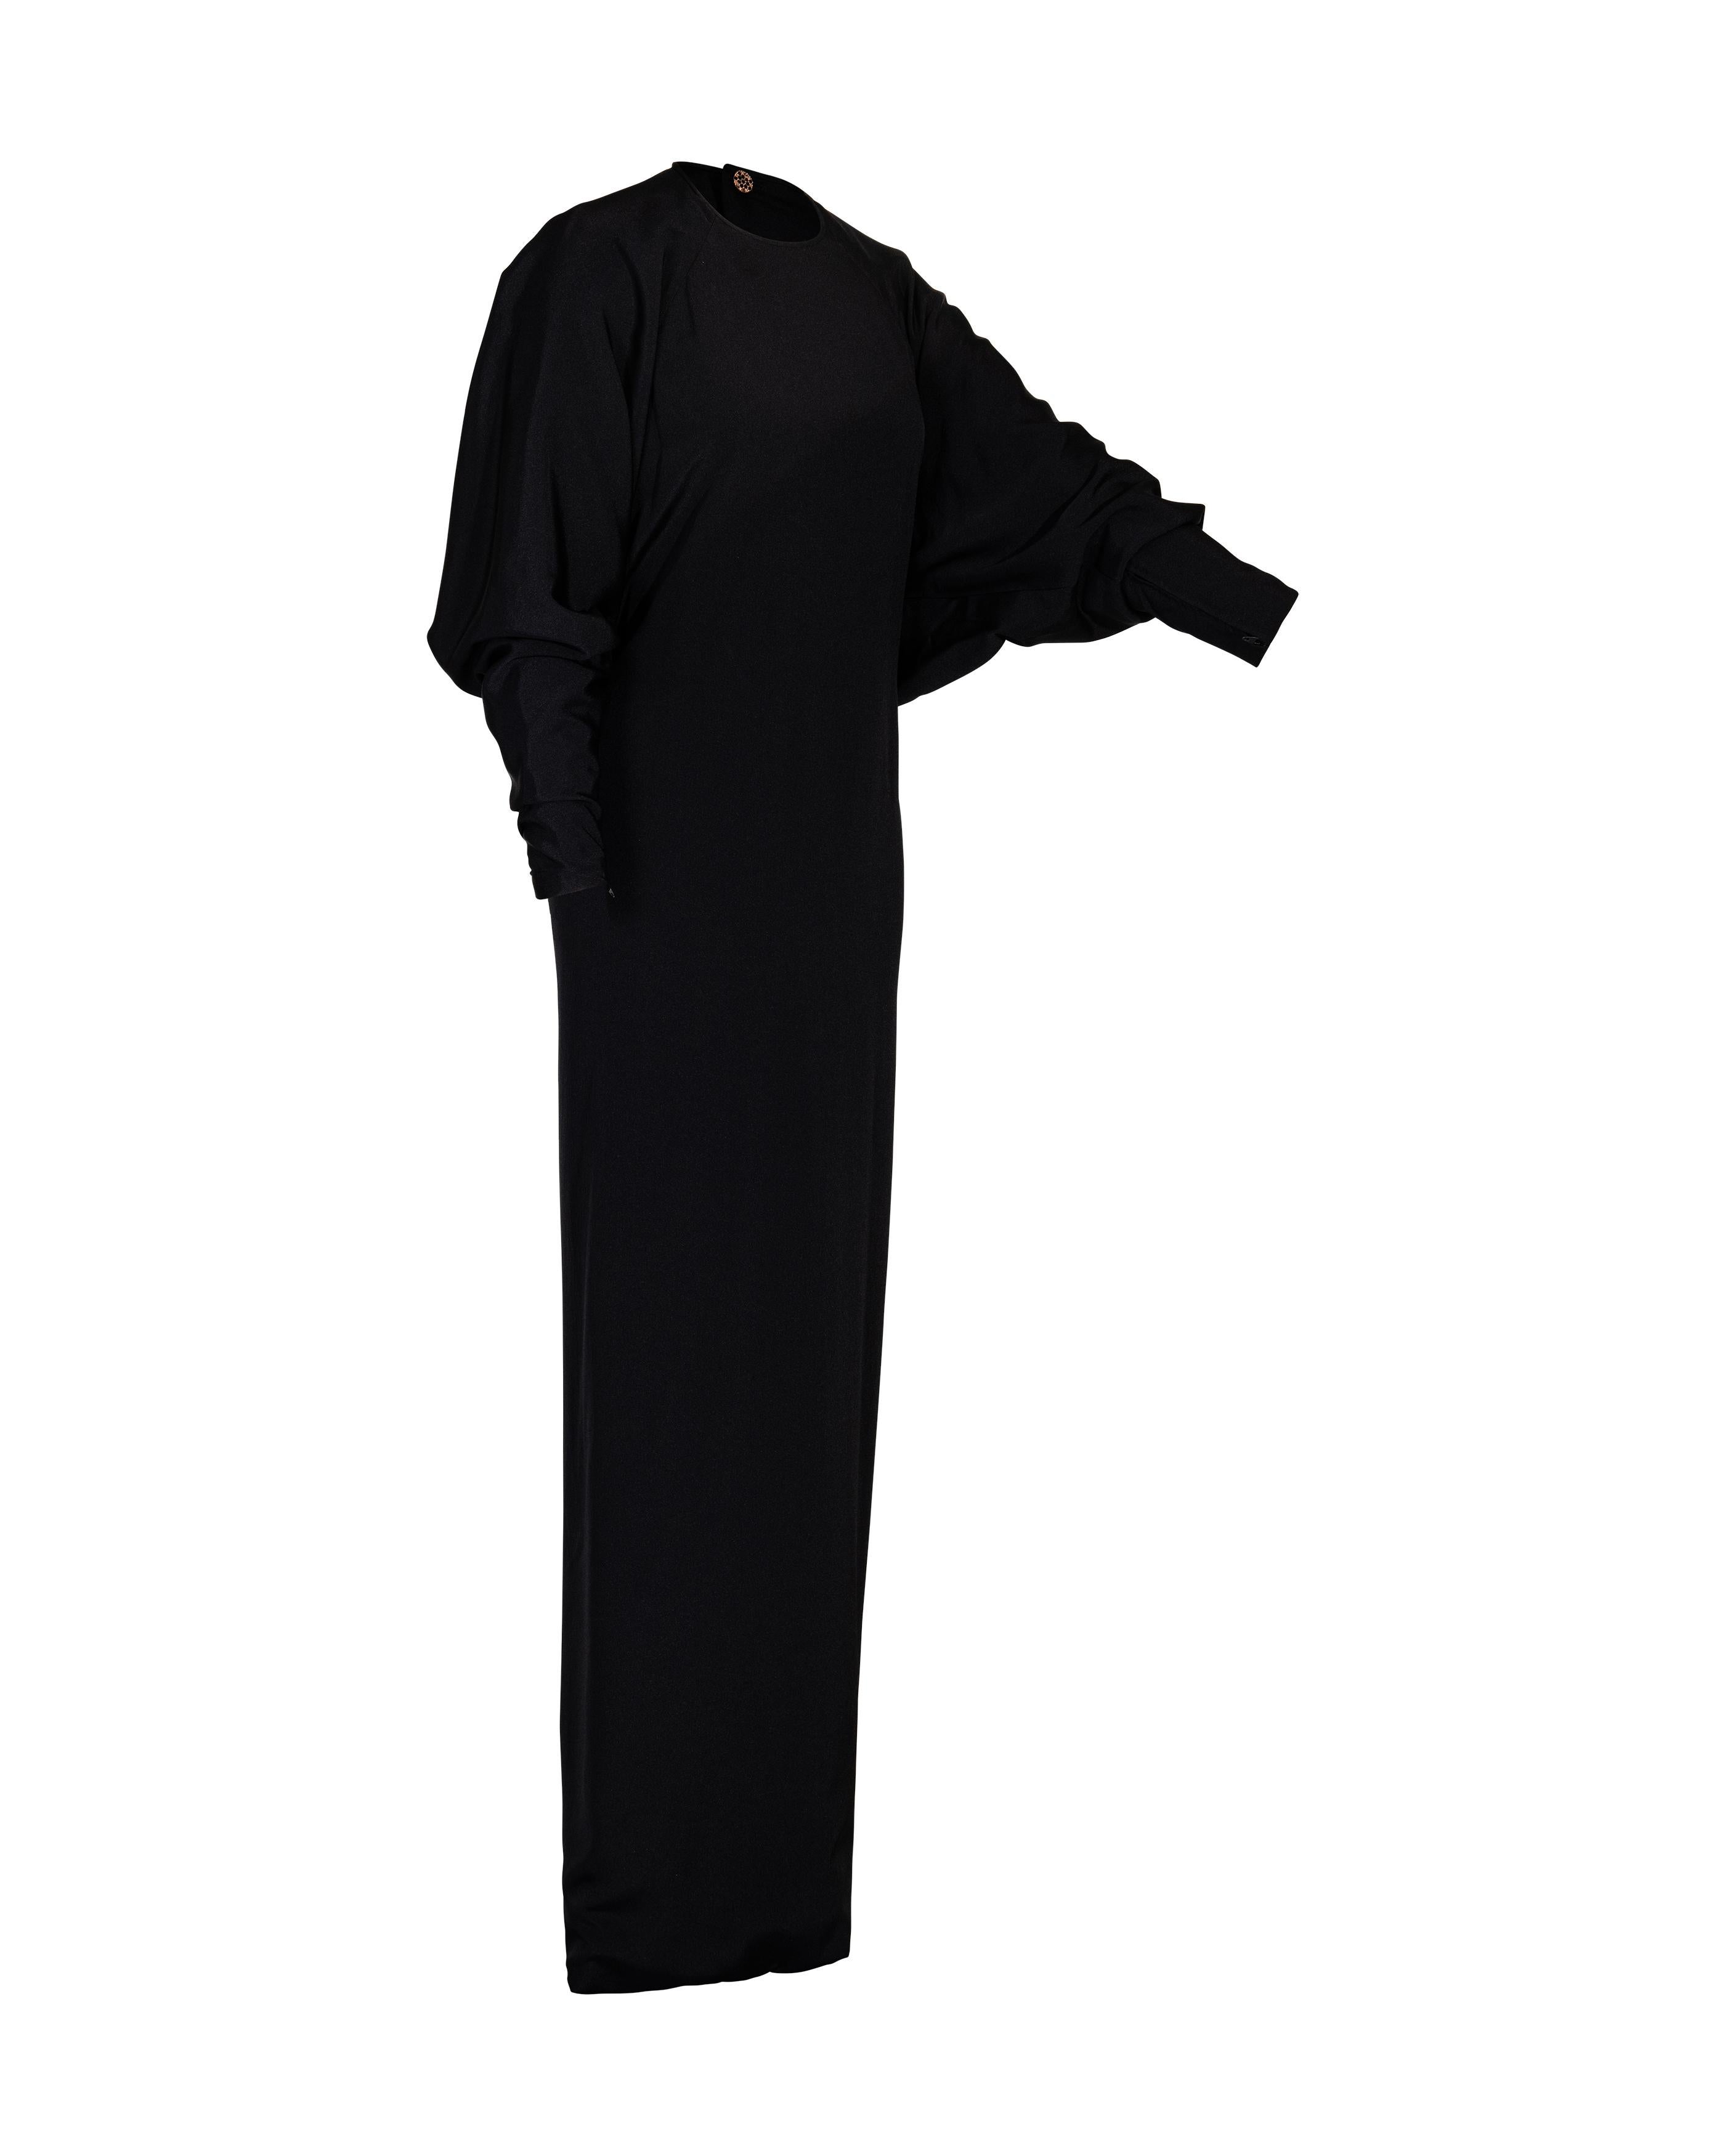 1960’s James Galanos batwing black gown with gold button-up back and hidden back zip closure. High-neck gown with fitted waist and subtle bat-wing open sleeves. A timeless piece. 